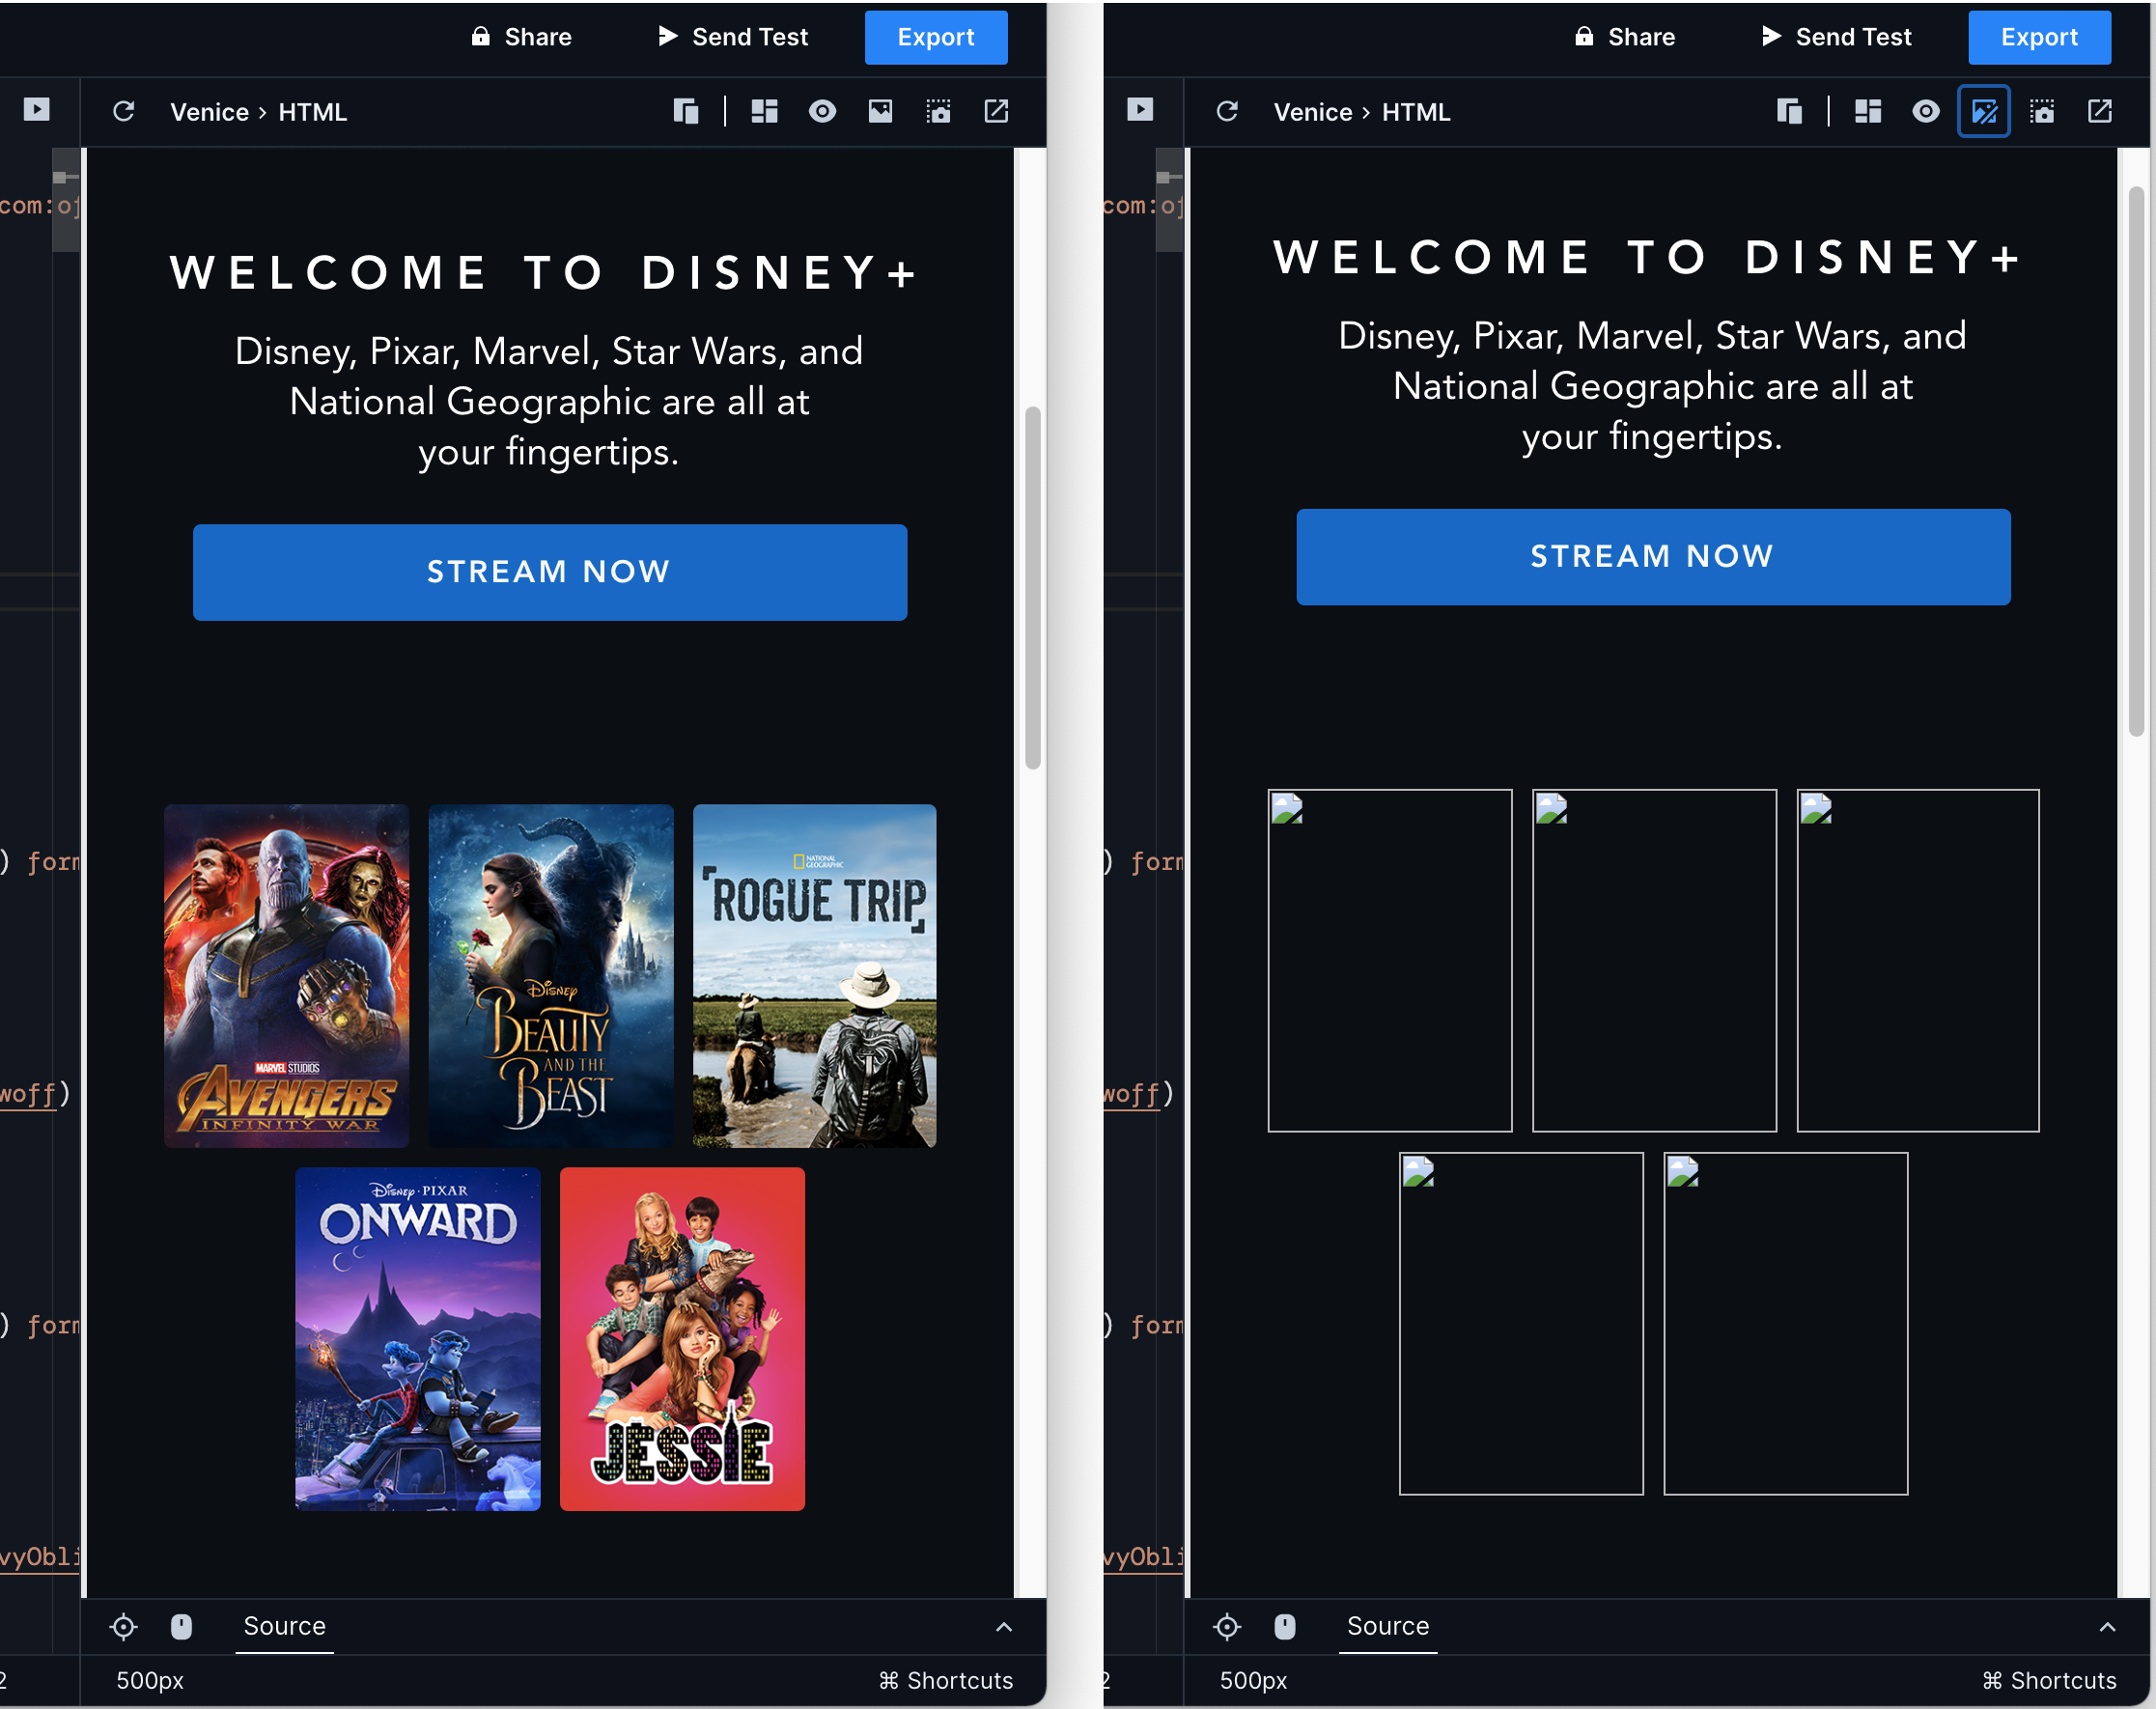 Up close images of the Preview with a Disney email displayed. The email has some text about newly released shows and movies, and below, 5 movie posters. The left image displays the email with images loaded. The right image displays the email with images blocked, and the 5 movie posters are represented as empty boxes.